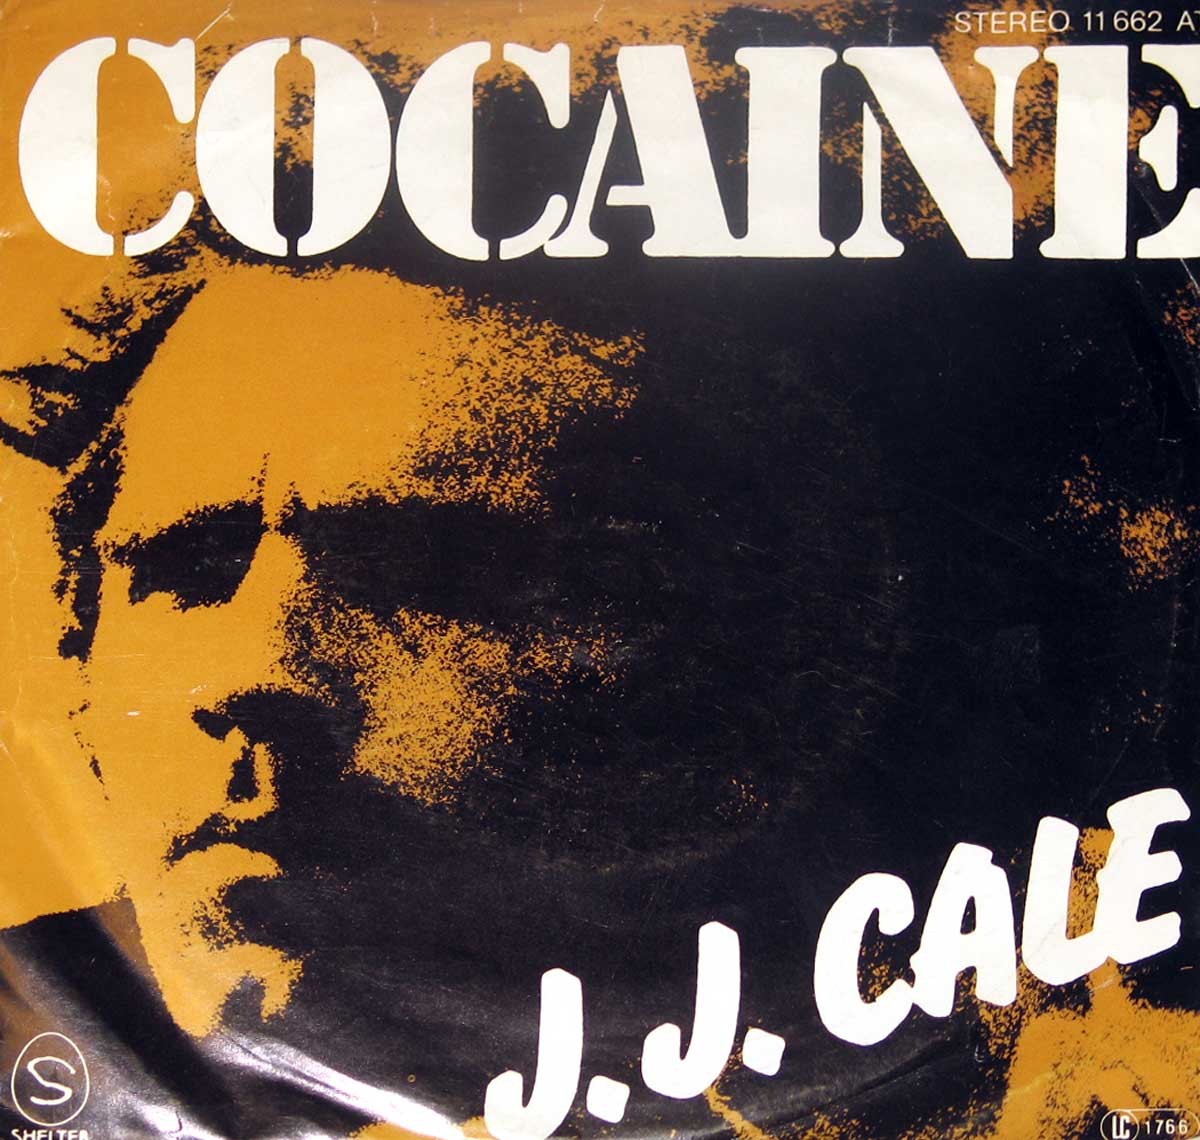 large album front cover photo of: J.J. Cale Cocaine / Hey Baby 7" picture sleeve Vinyl Single  